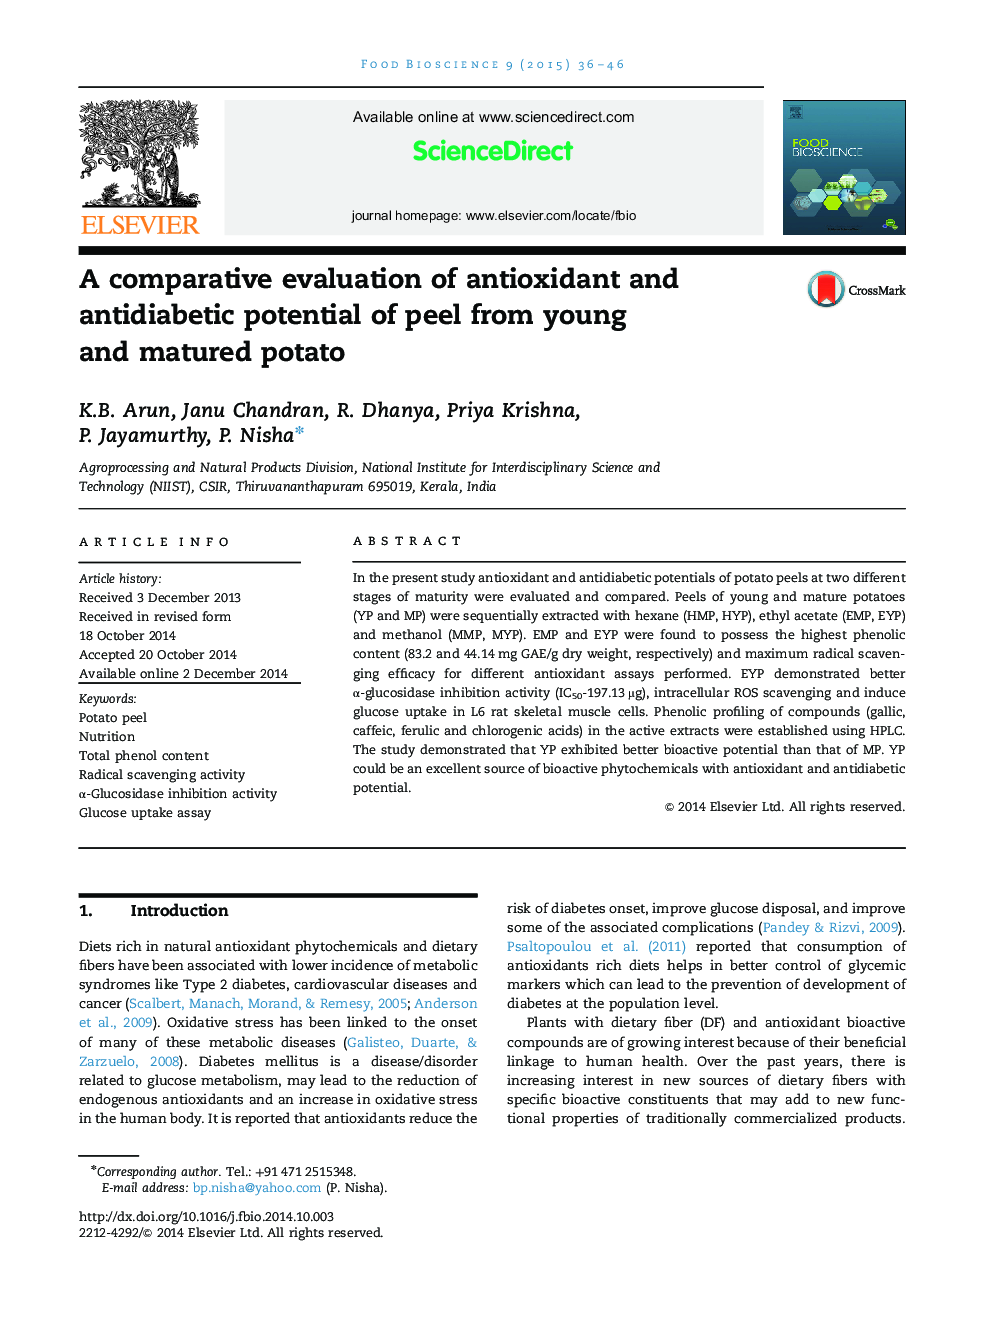 A comparative evaluation of antioxidant and antidiabetic potential of peel from young and matured potato